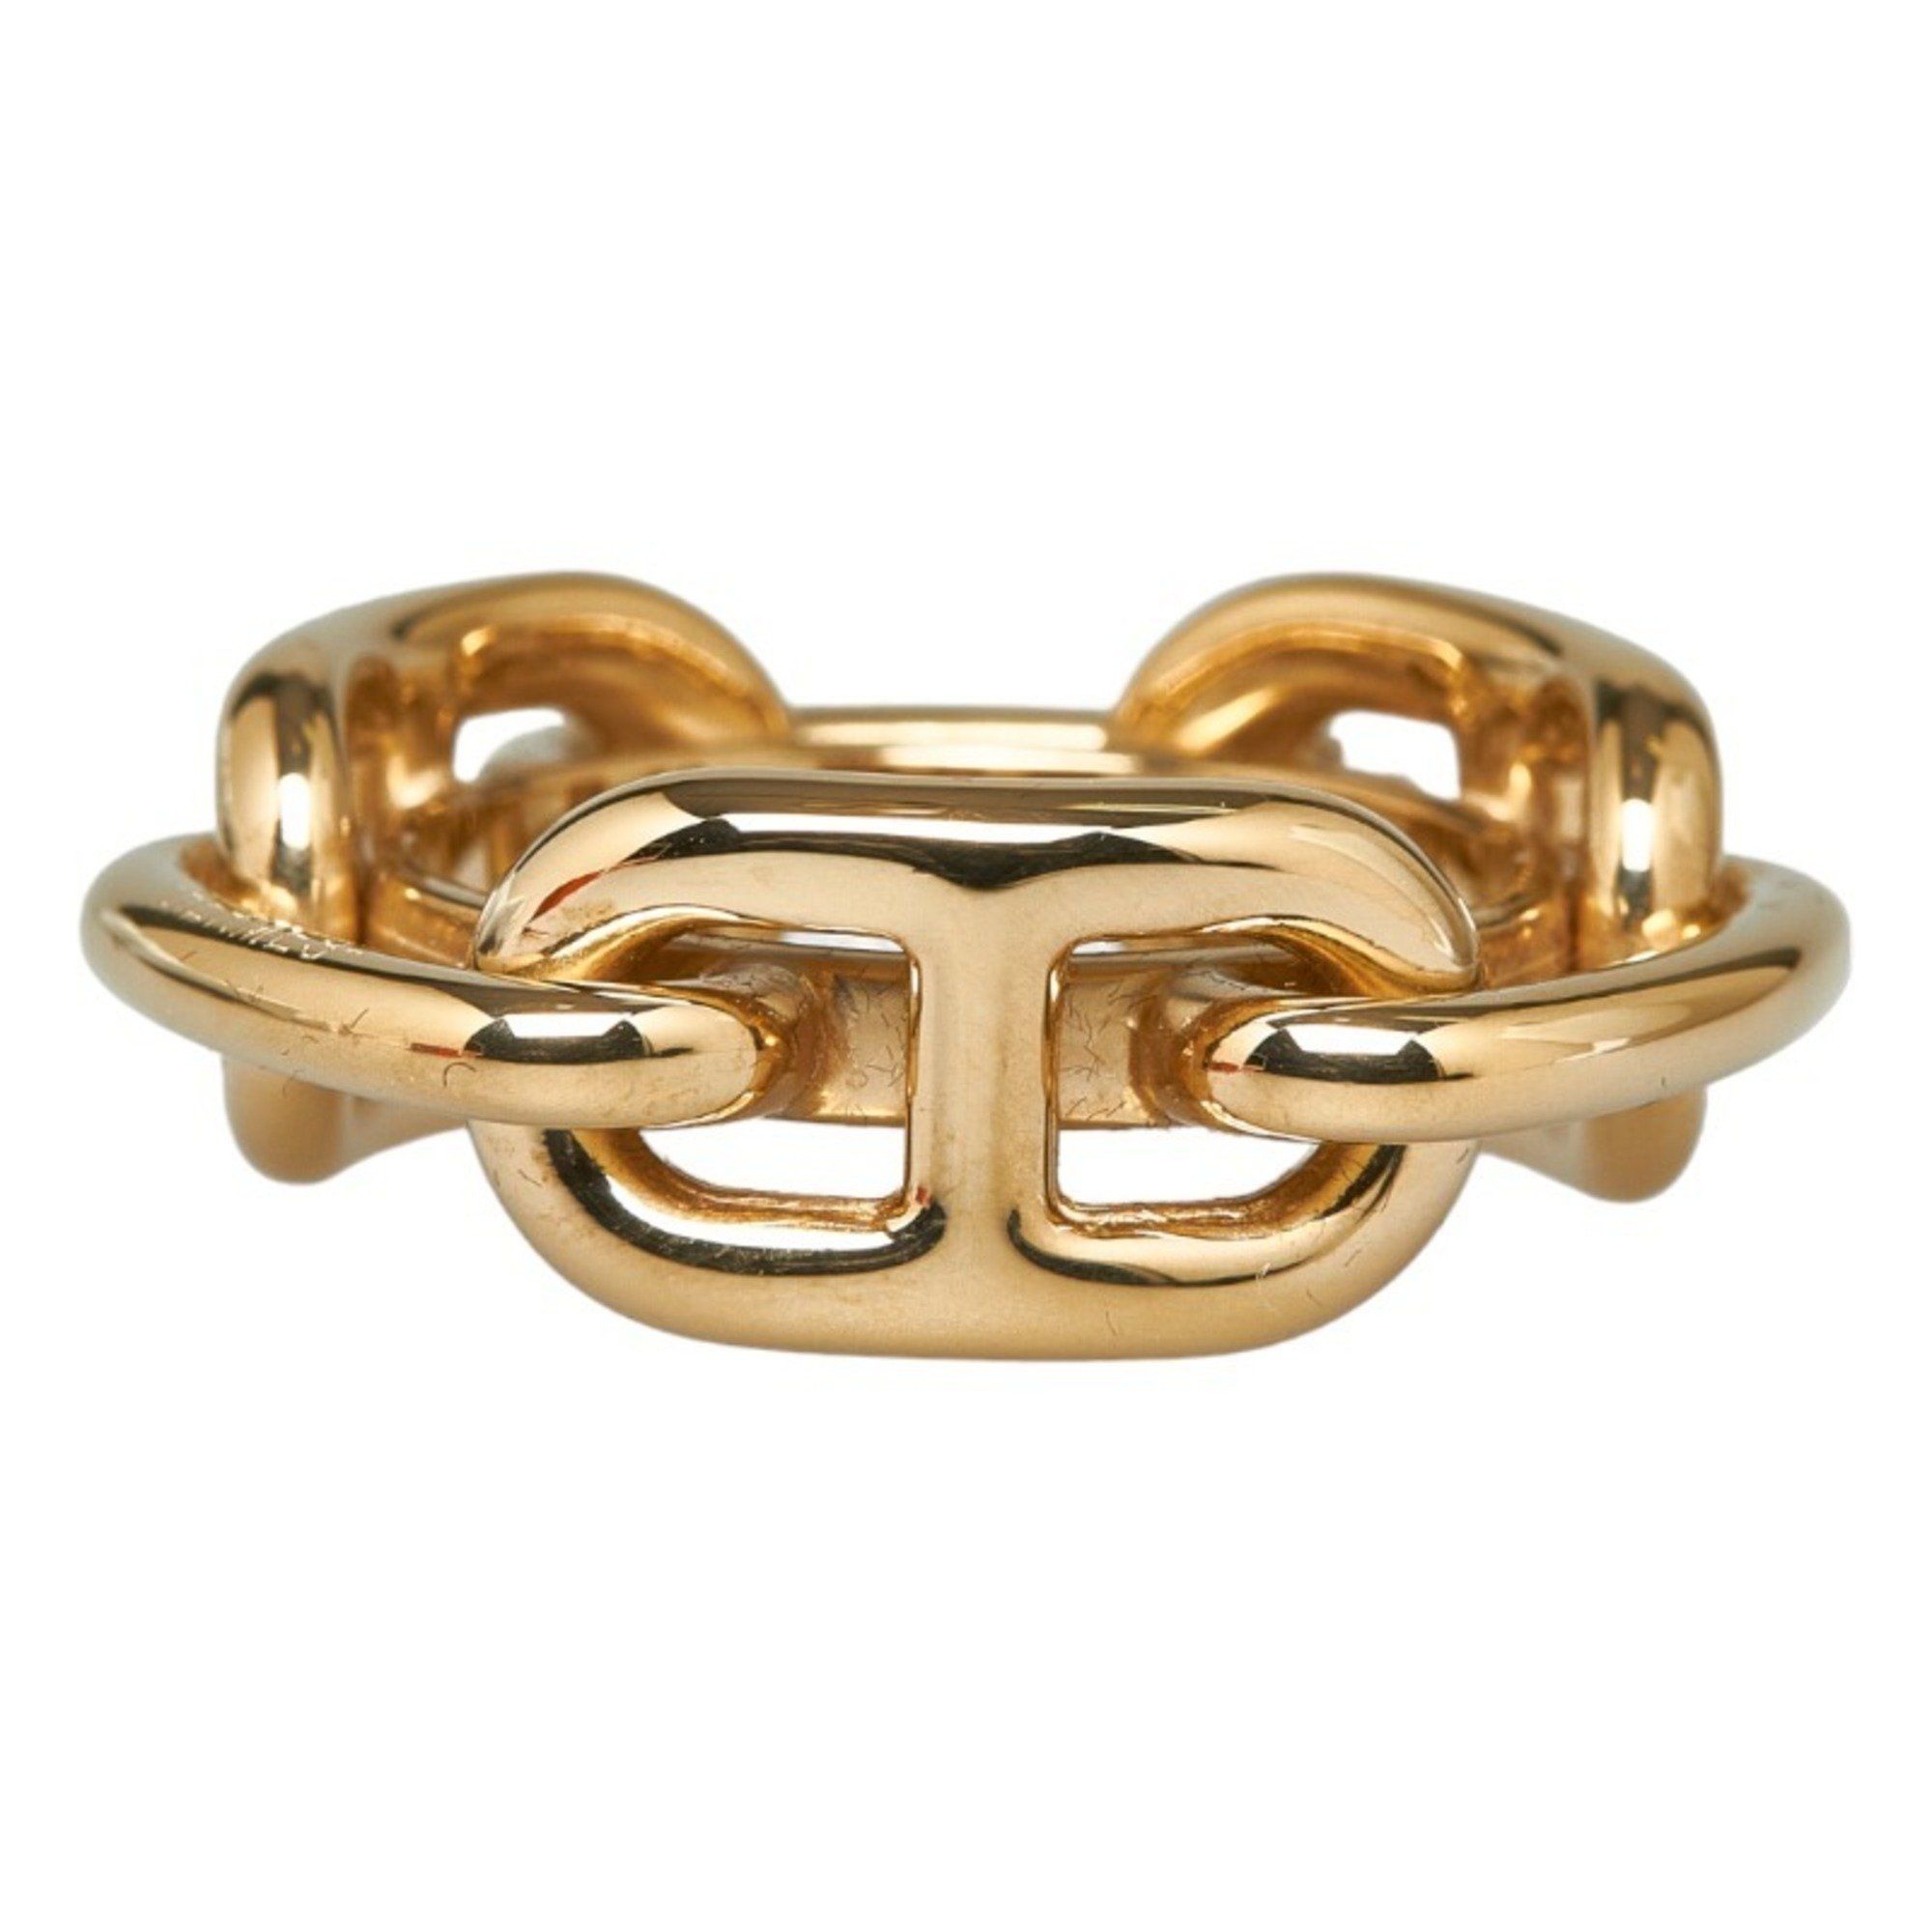 image of Hermes Legate Chaine D'ancre Scarf Ring Gold Plated Women's Hermes